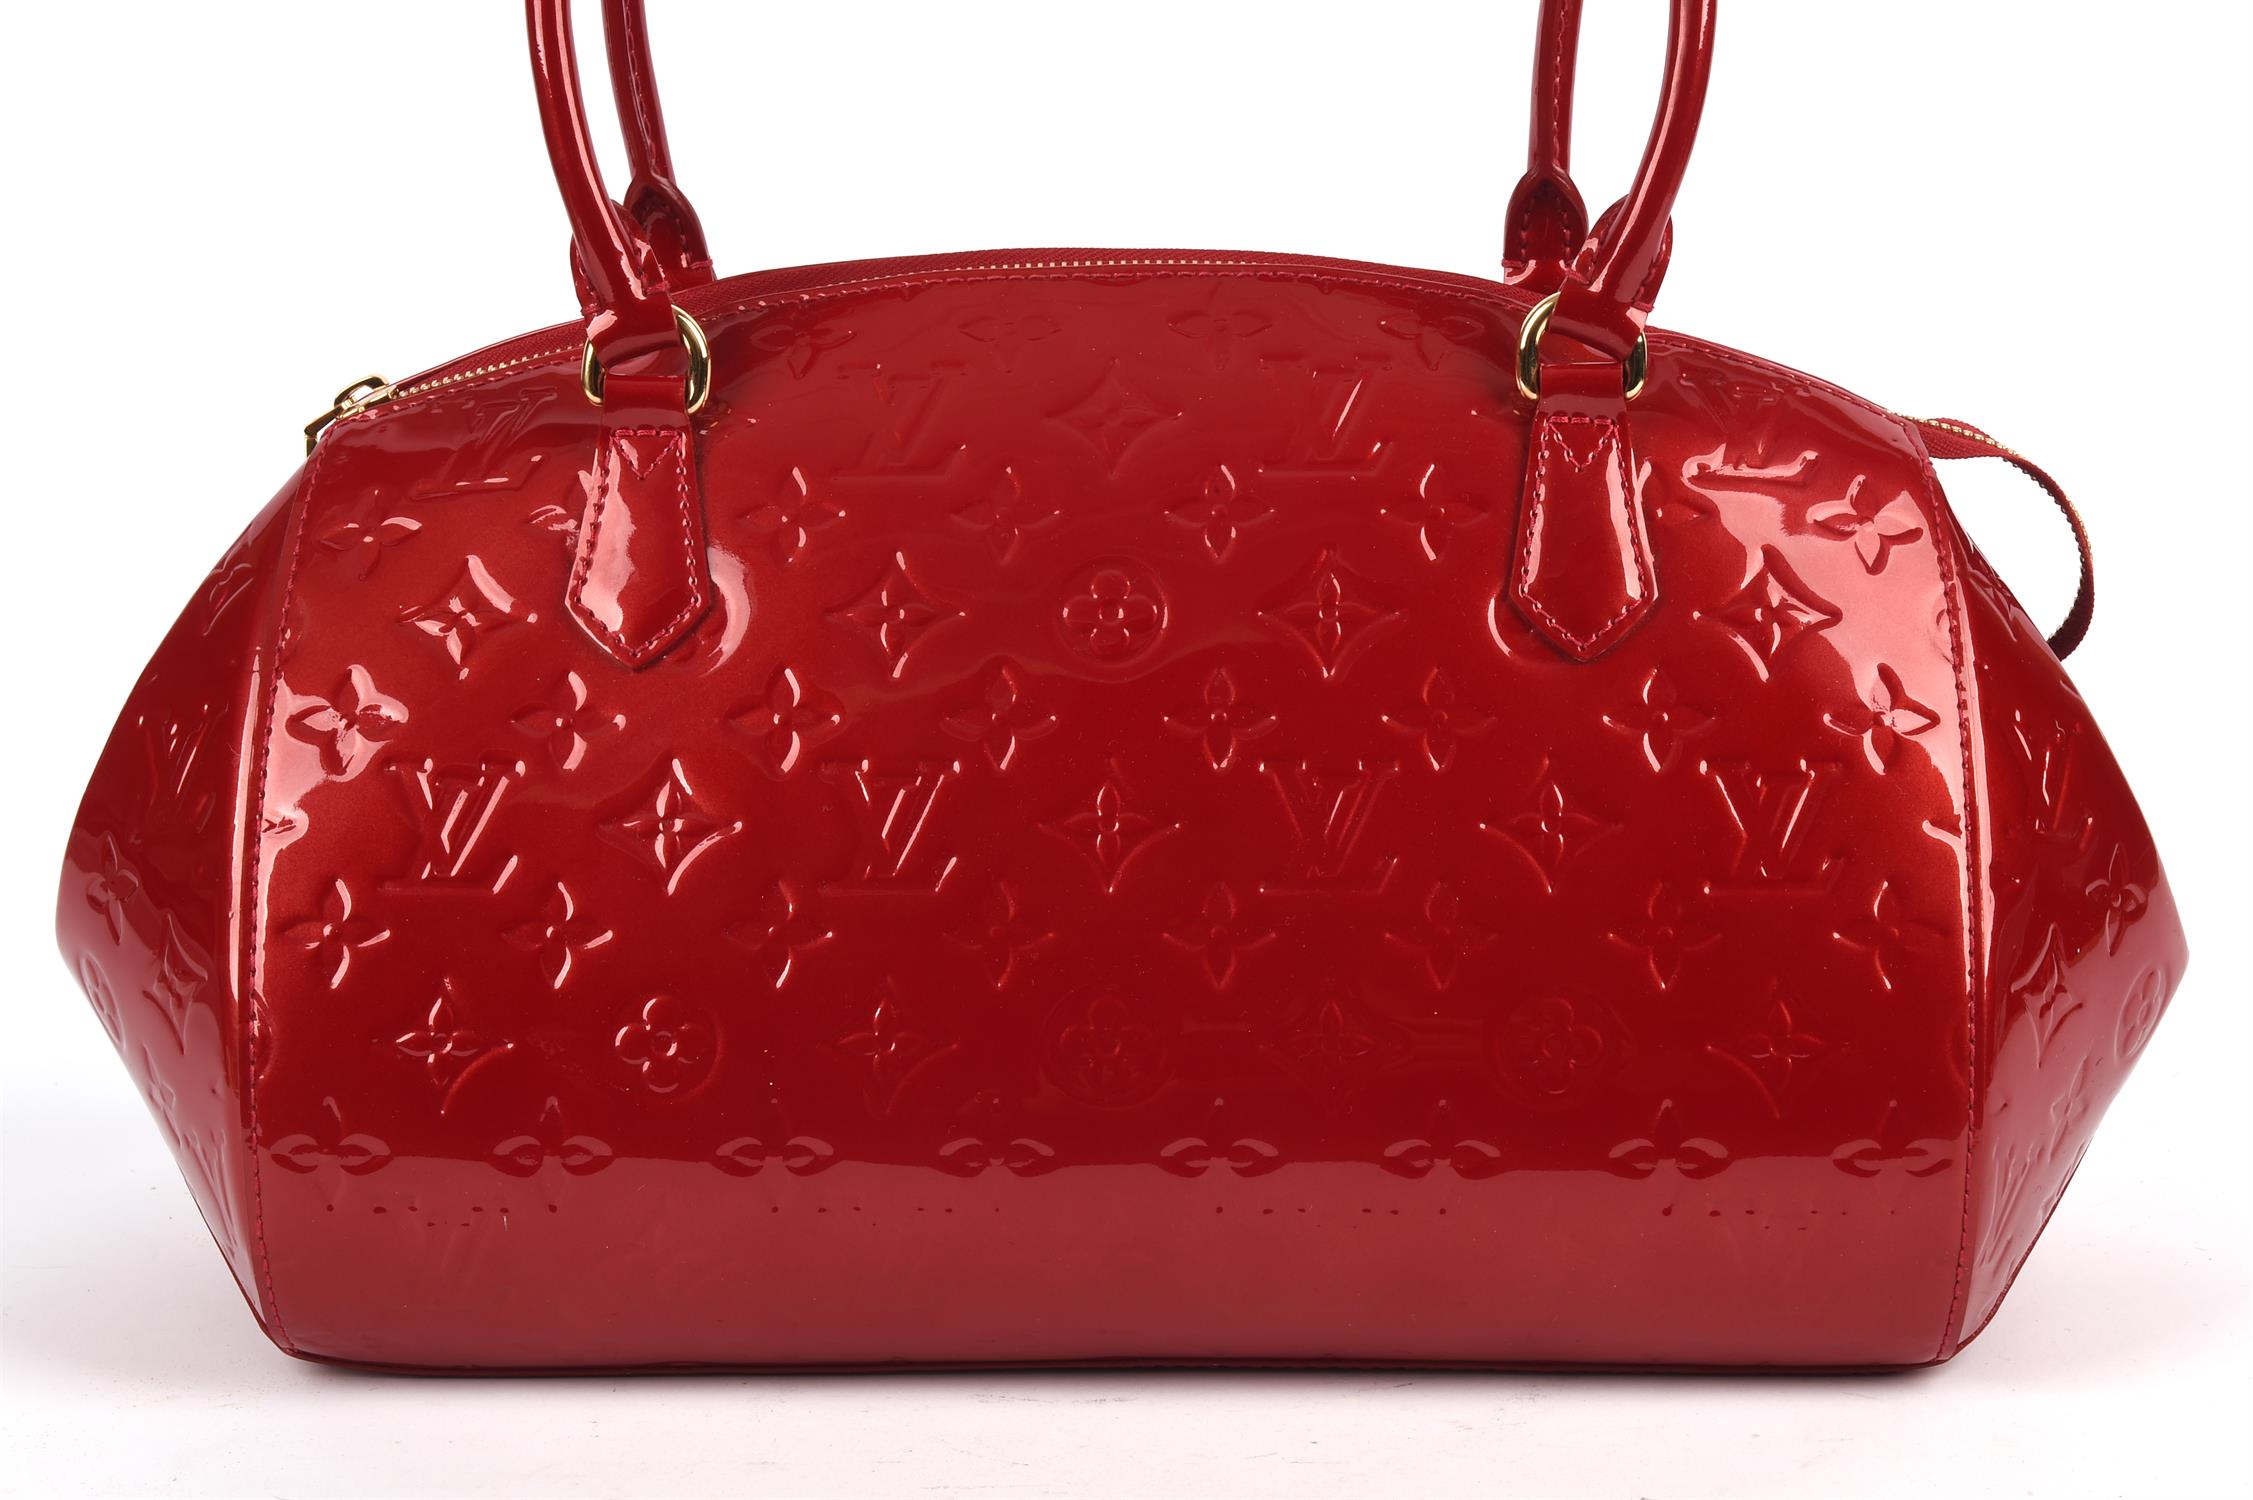 LOUIS VUITTON lipstick red Vernis varnished leather French Montana handbag with gold coloured - Image 2 of 8